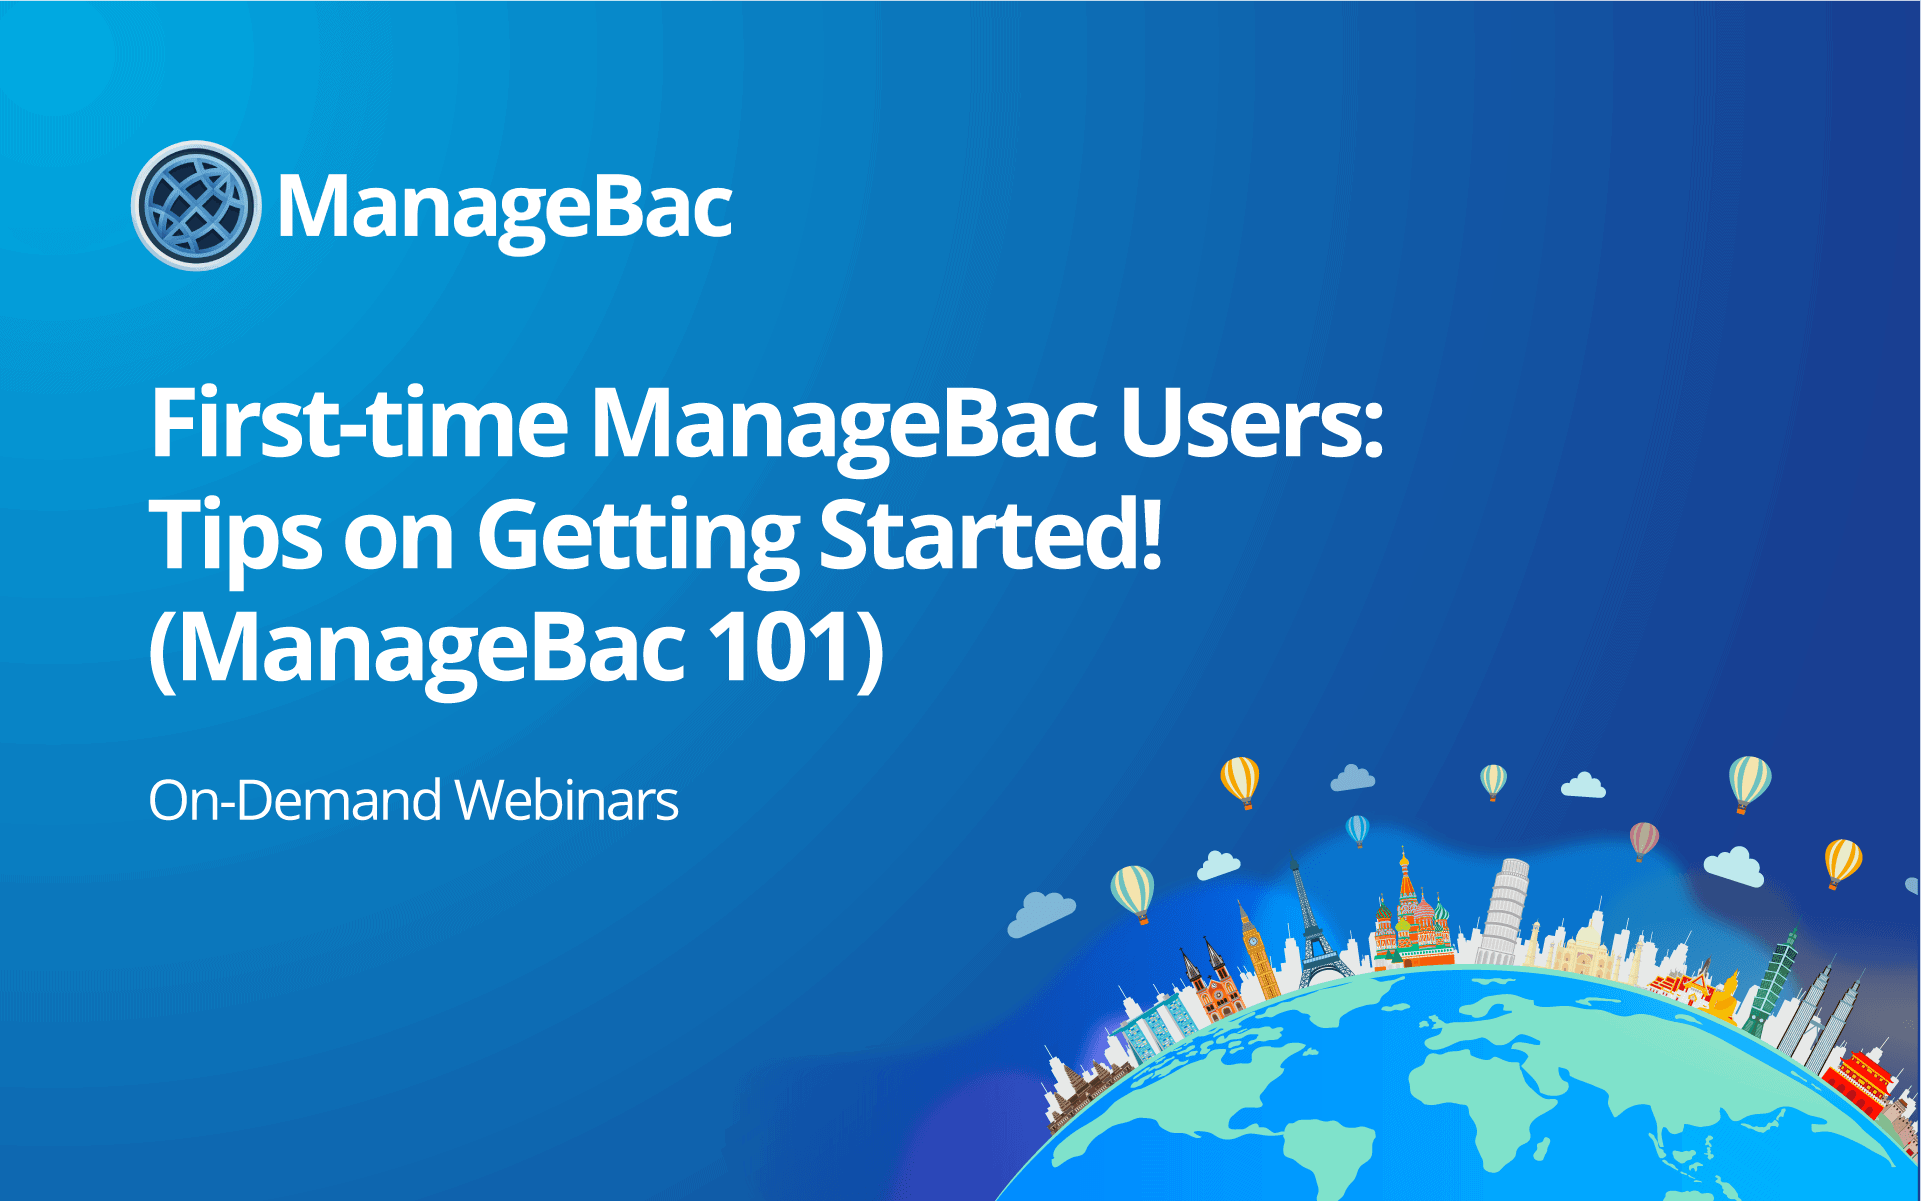 First-time ManageBac Users: Tips on Getting Started! (ManageBac 101)